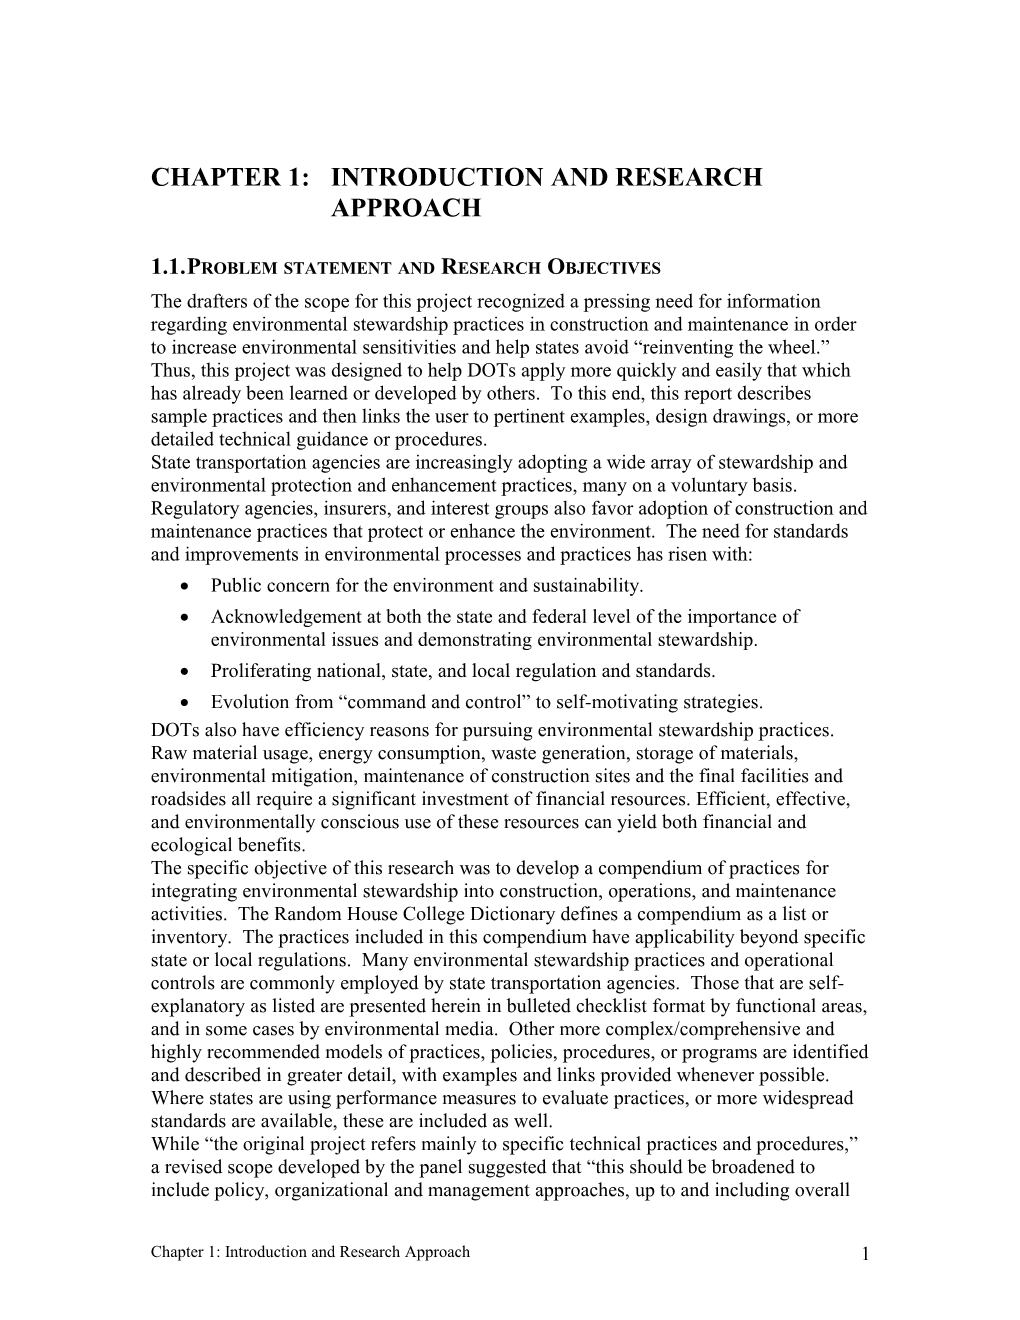 CHAPTER 1:Introduction and Research Approach